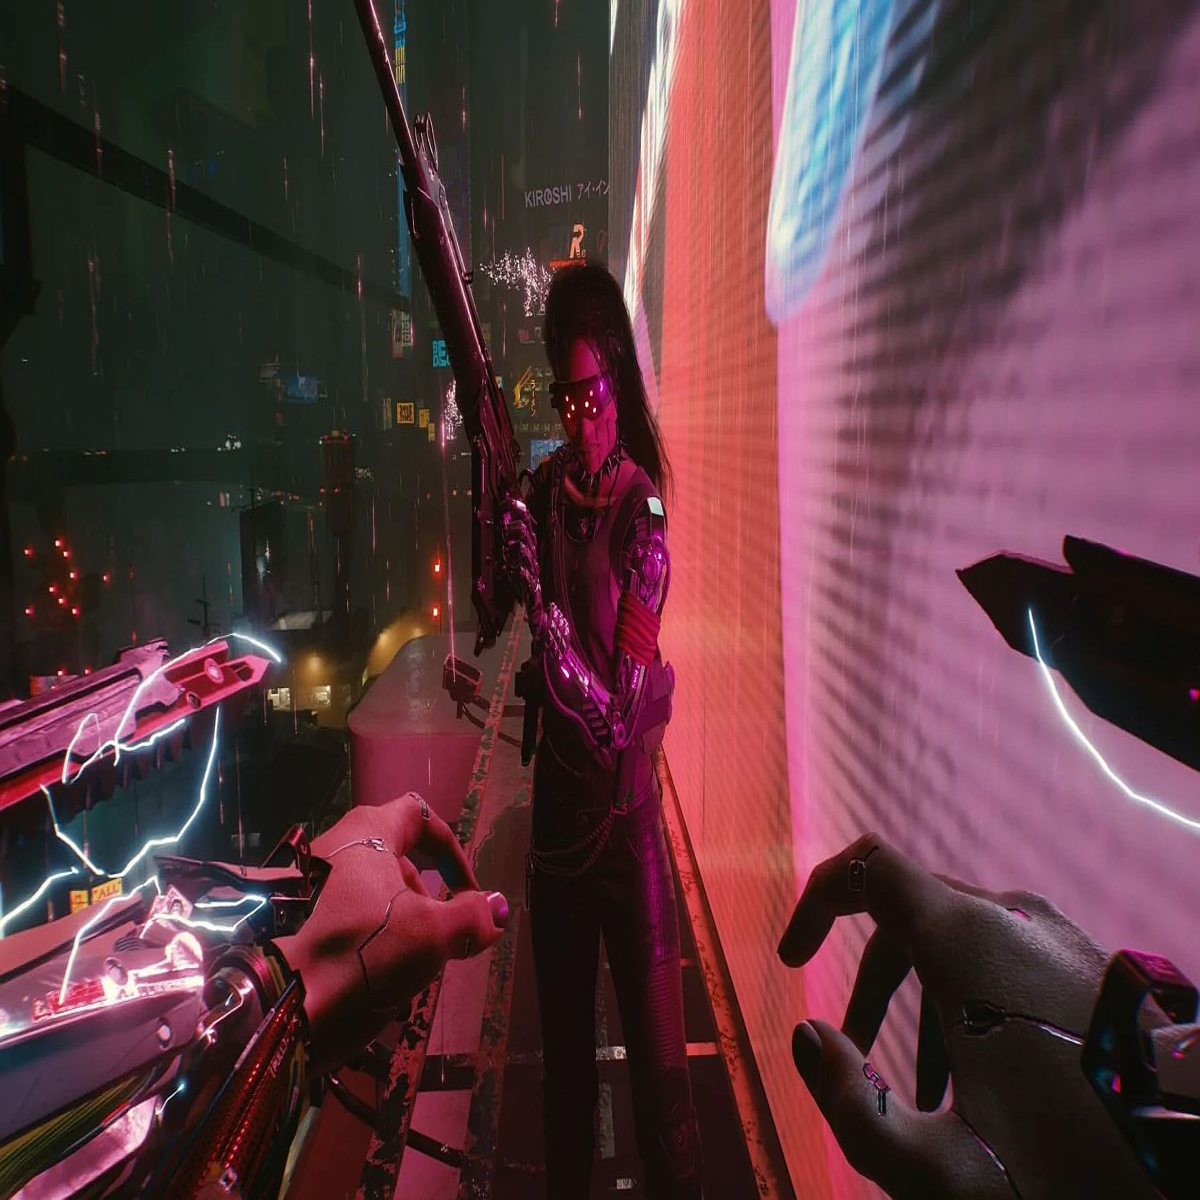 Mod away with REDmod! - Home of the Cyberpunk 2077 universe